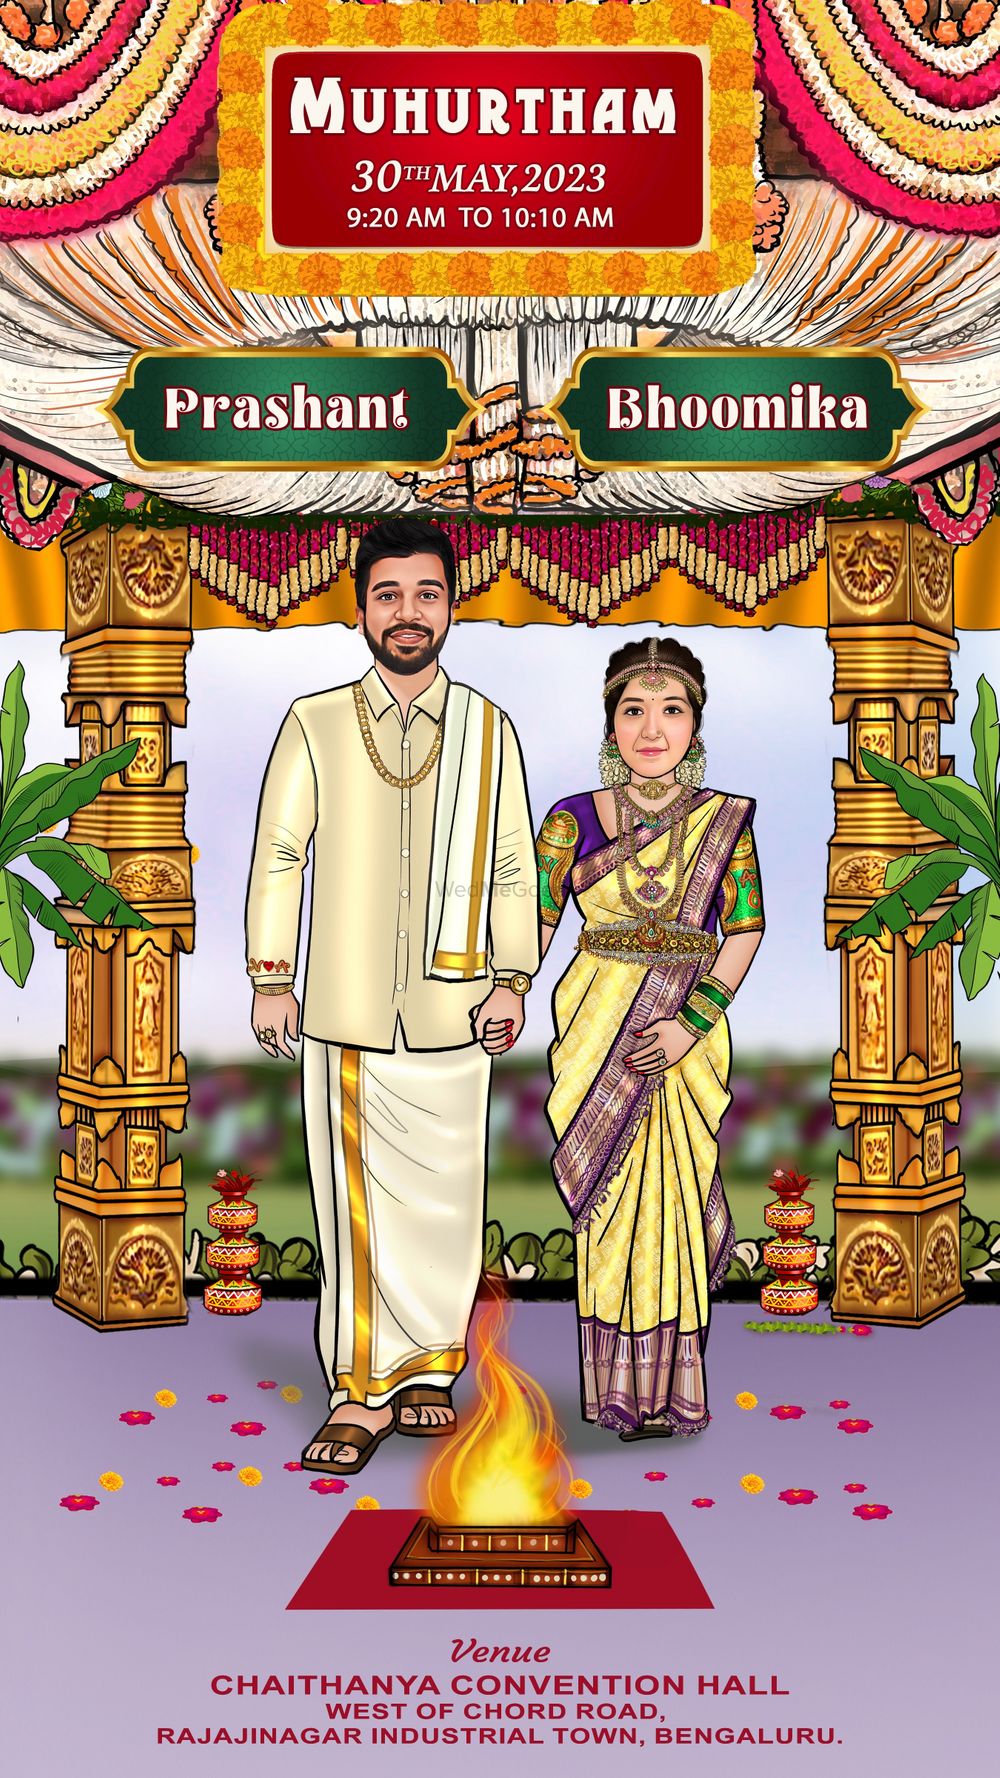 Photo From South Indian Wedding Caricature Invitation - By Prashant Arts